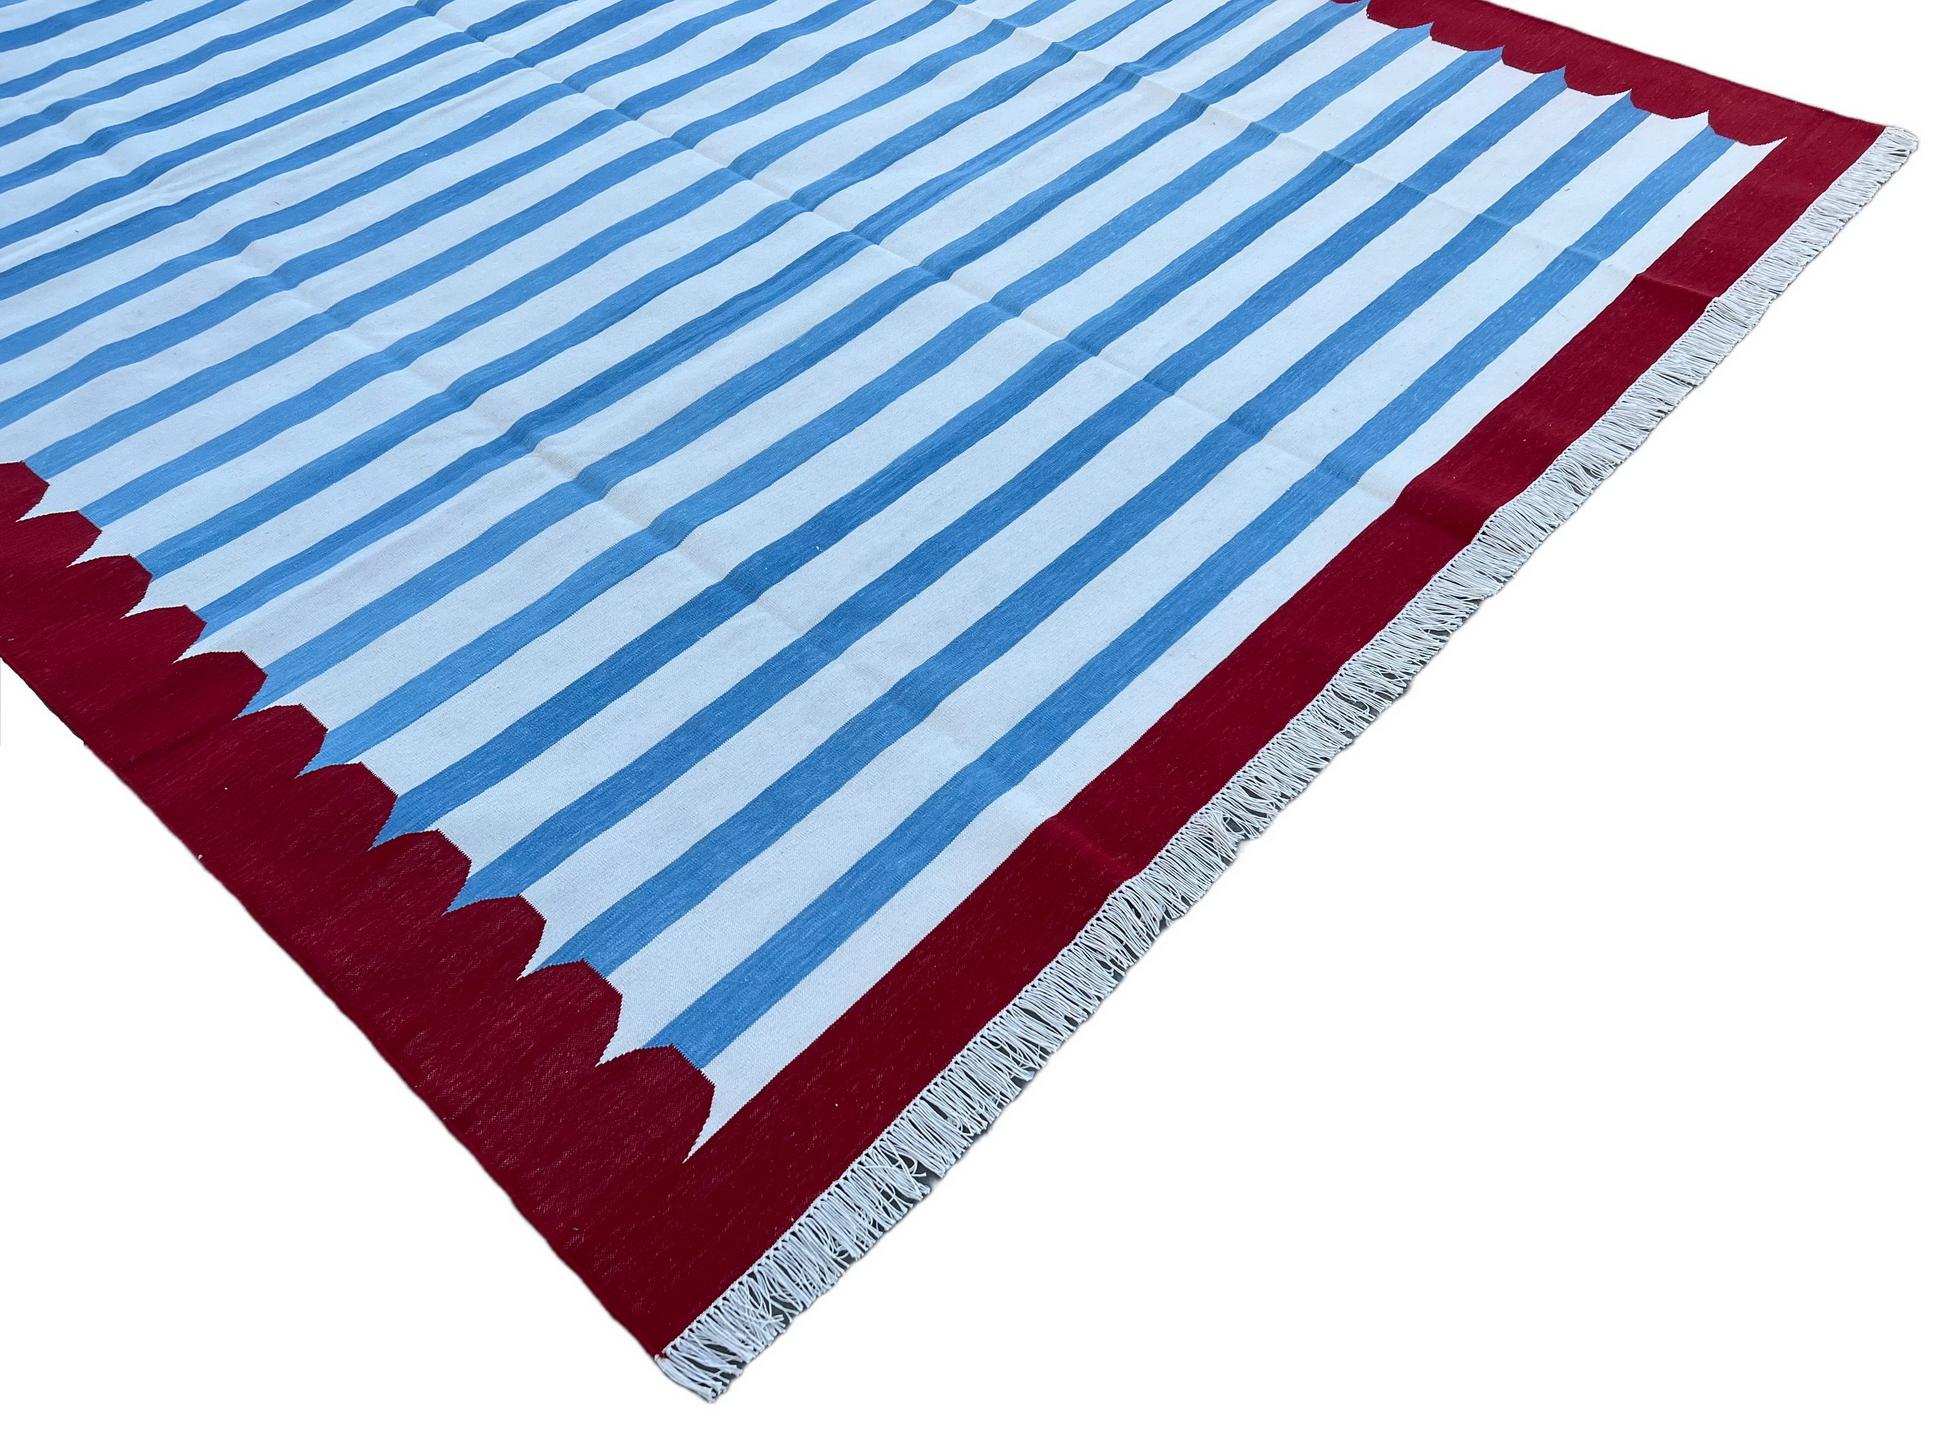 Hand-Woven Handmade Cotton Area Flat Weave Rug, 8x10 Blue And Red Striped Indian Dhurrie For Sale